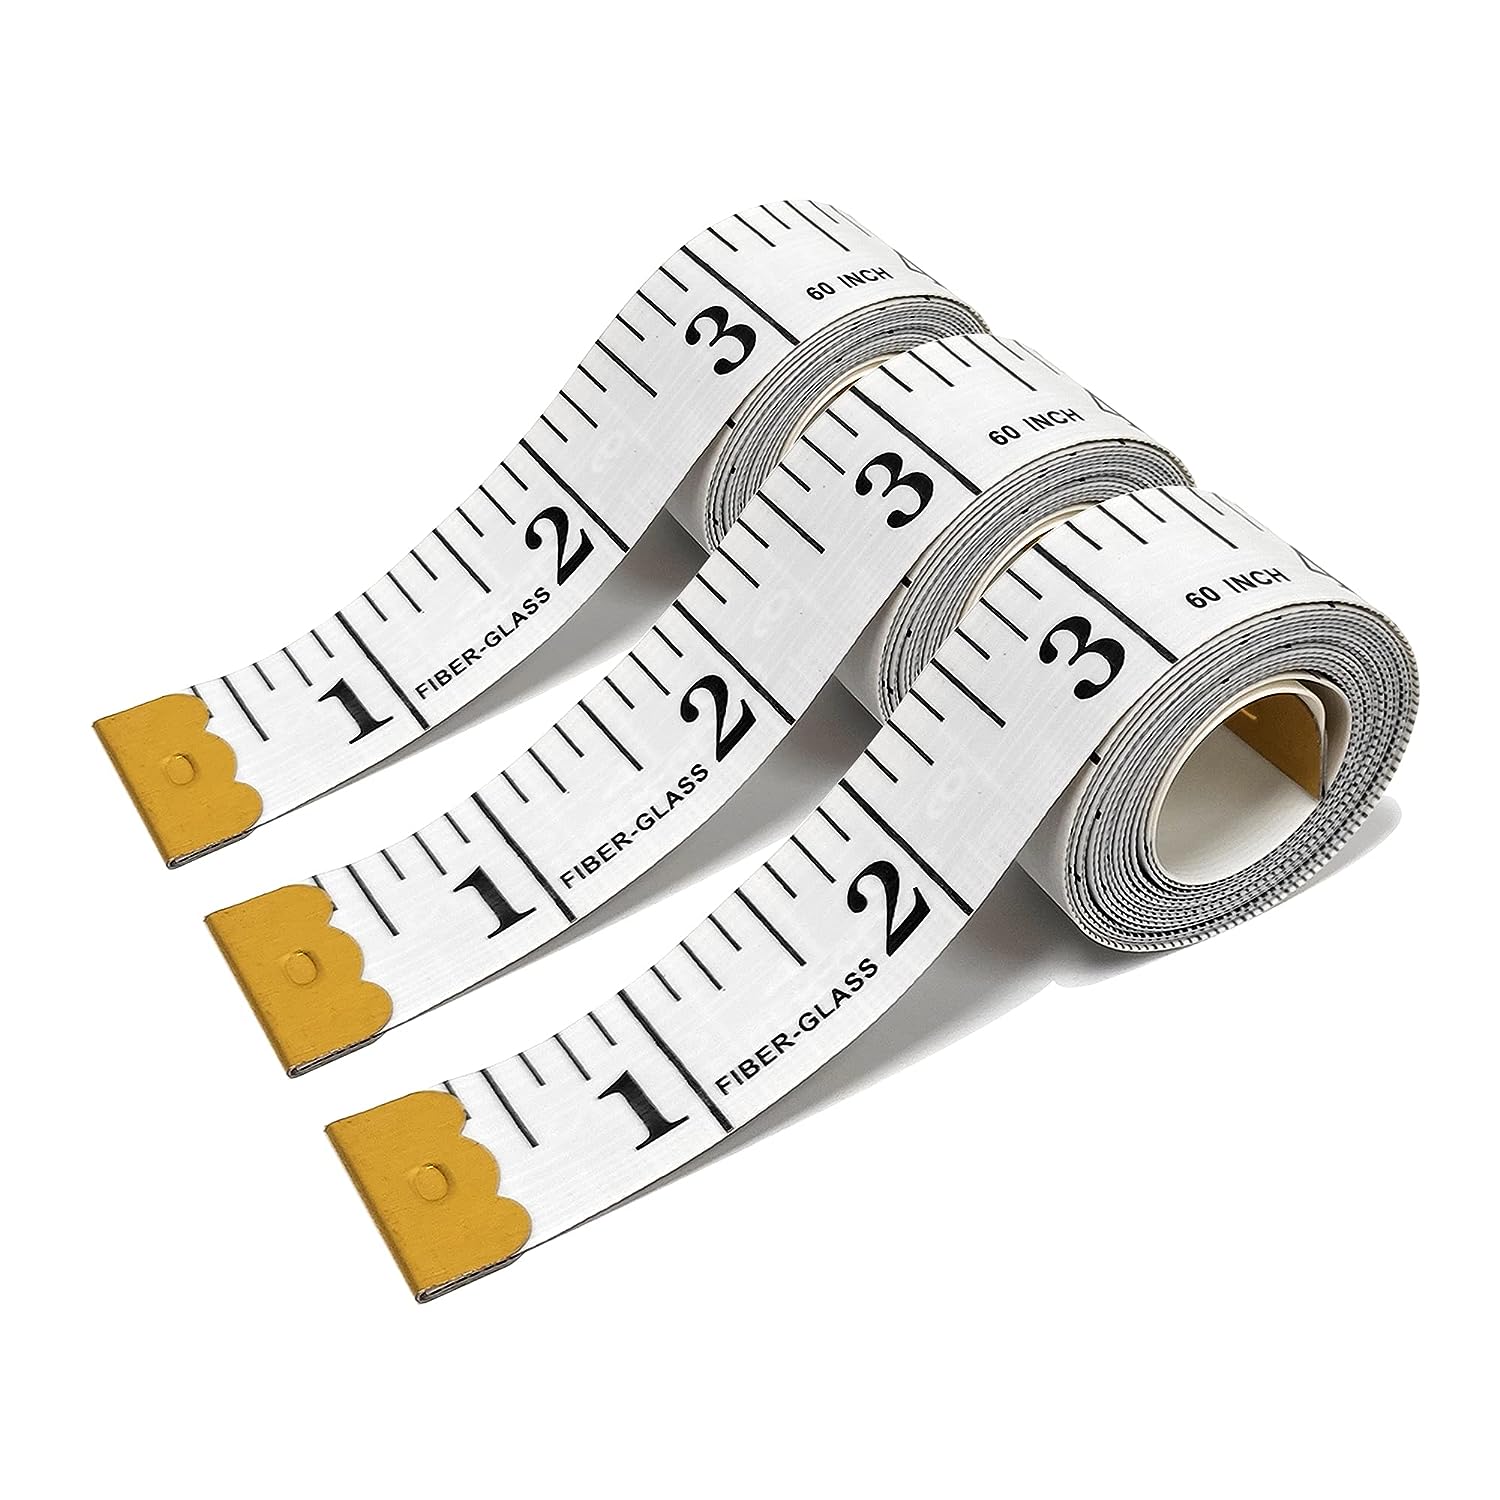 Sewing Tape Measure, Medical Body Cloth Tailor Craft Dieting Measuring Tape,  60 Inch/1.5M Dual Sided Retractable Ruler with Push Button Round(1 Pack,  Brown)